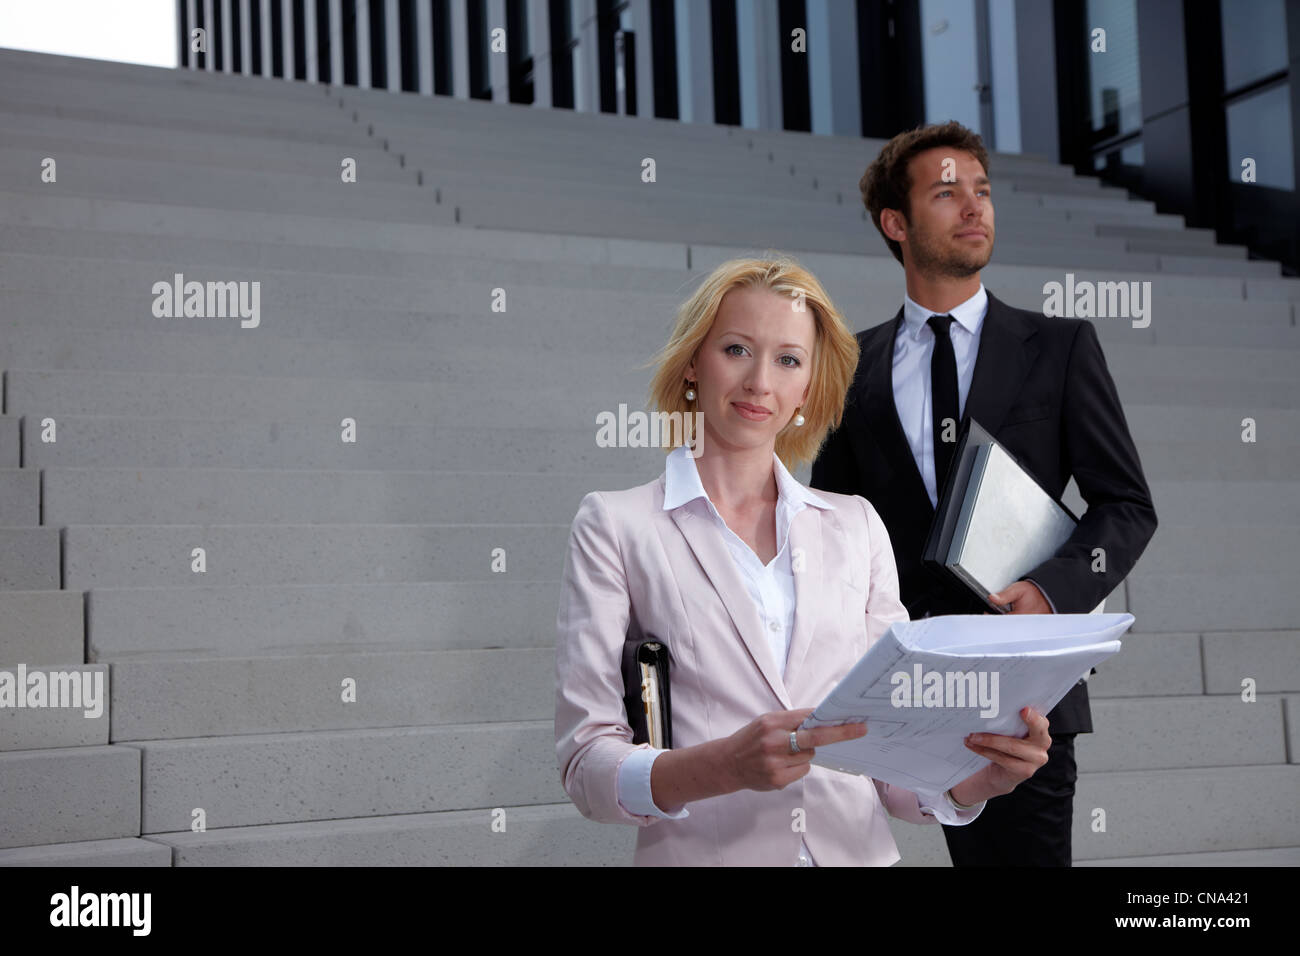 man and woman with plan standing on stairs Stock Photo